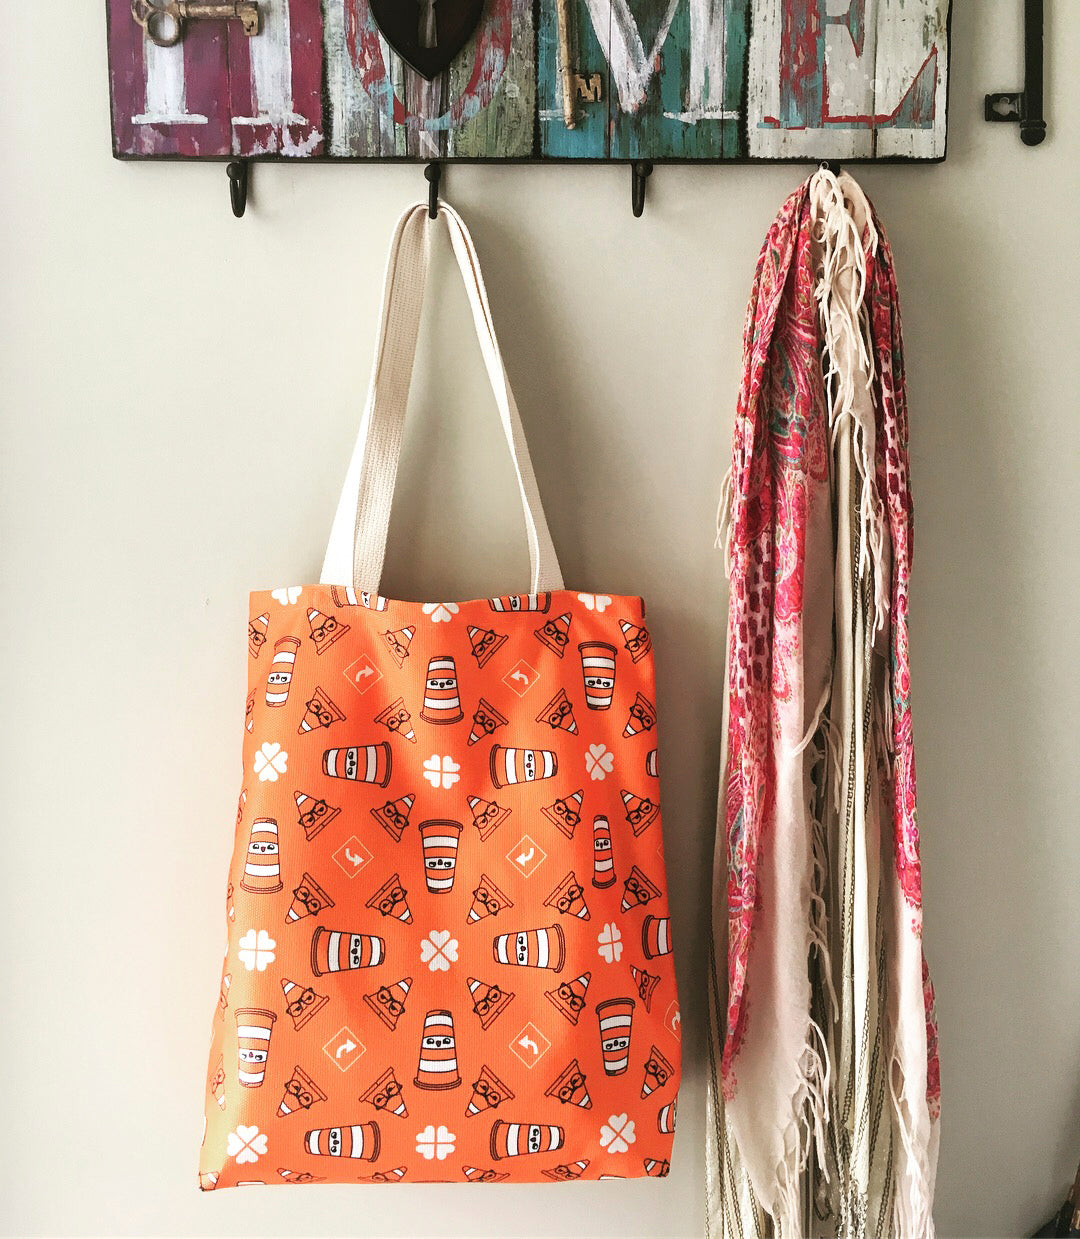 Construction pattern tote bag